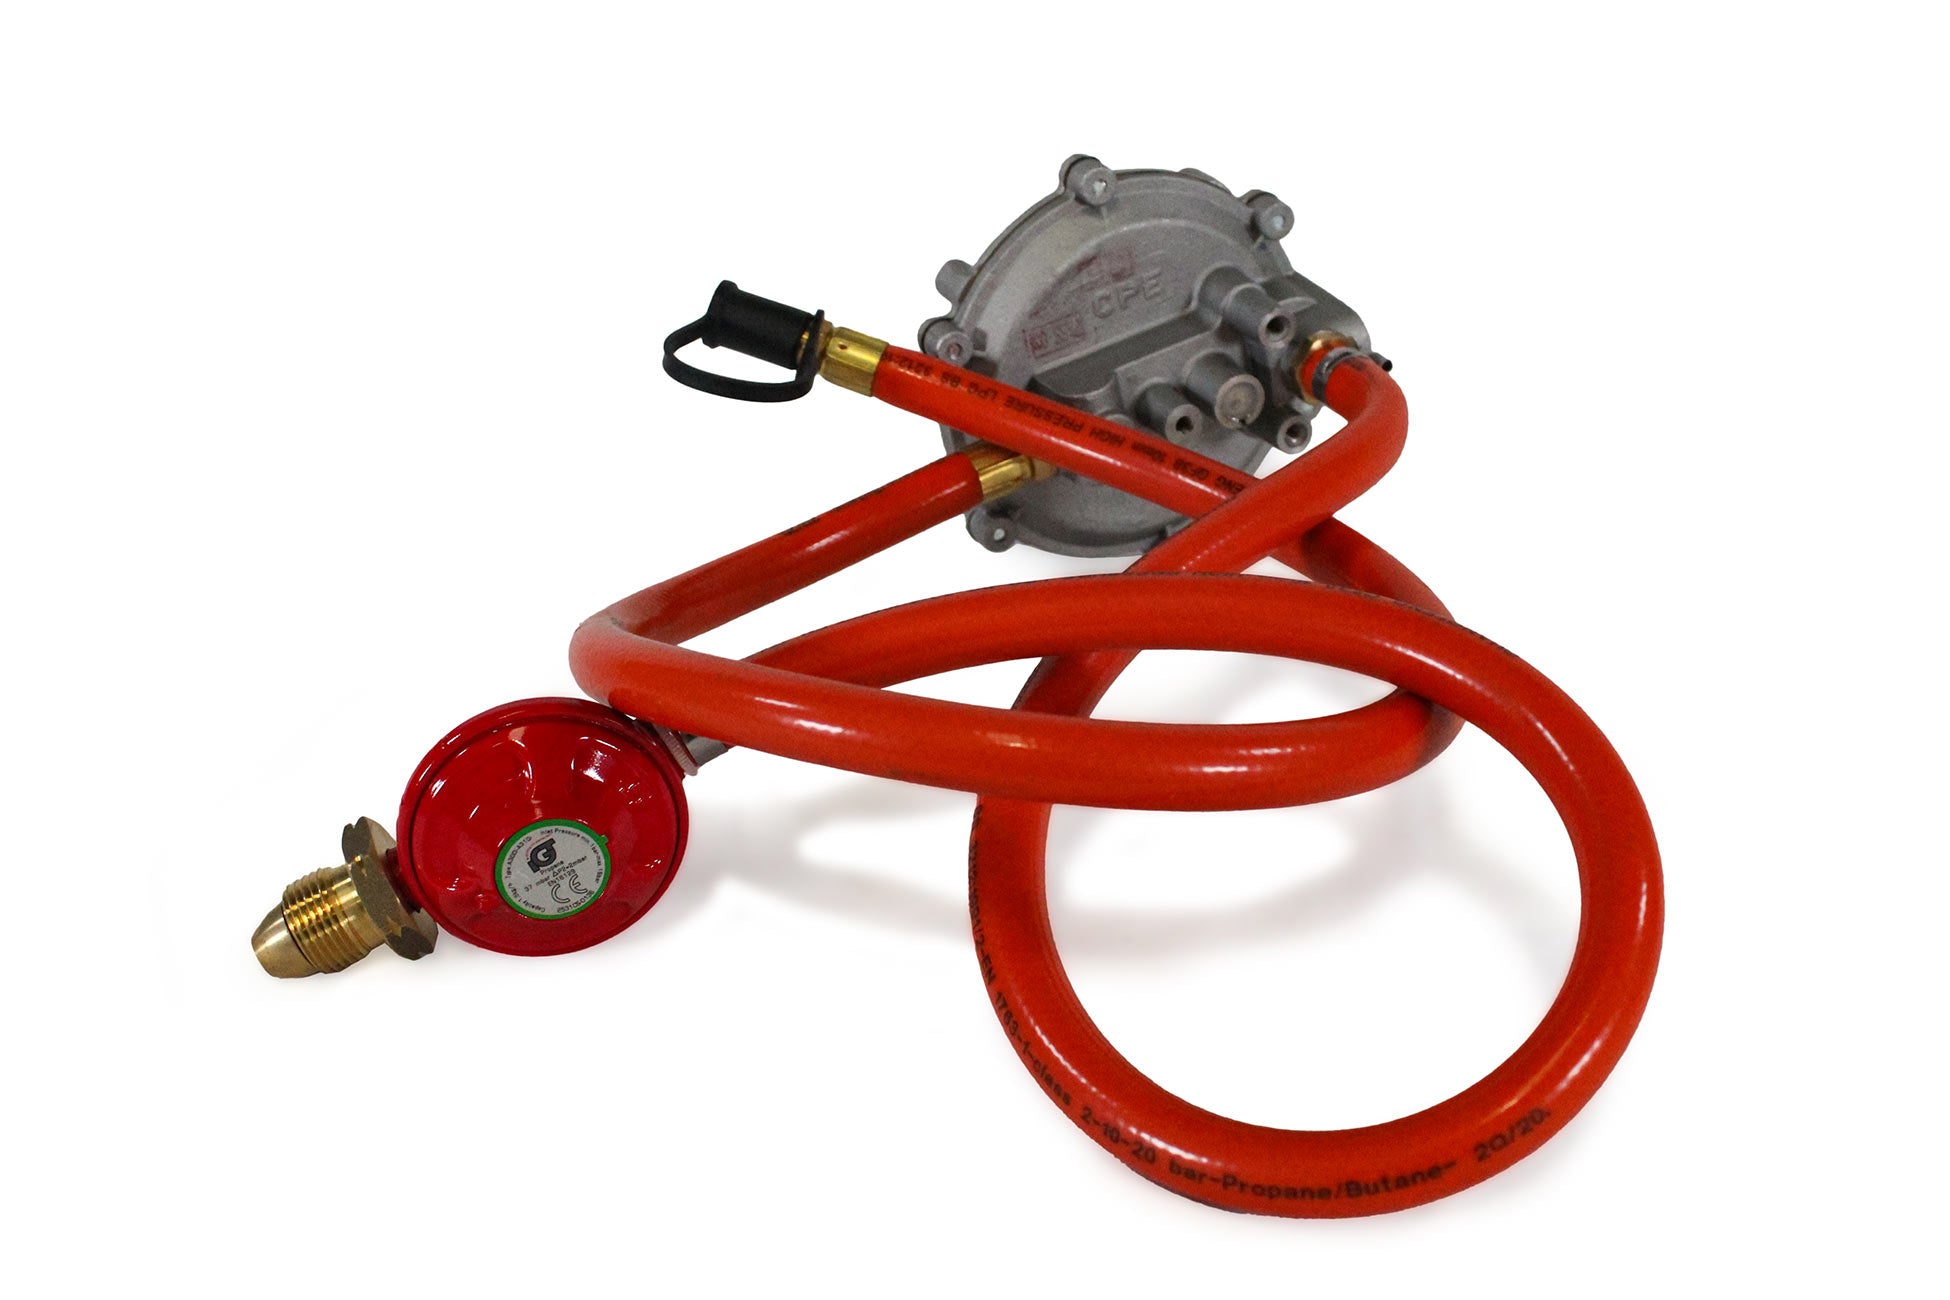 LPG Gas hose that is included with the Champion 2000 Watt LPG Dual Fuel Inverter Generator pipe